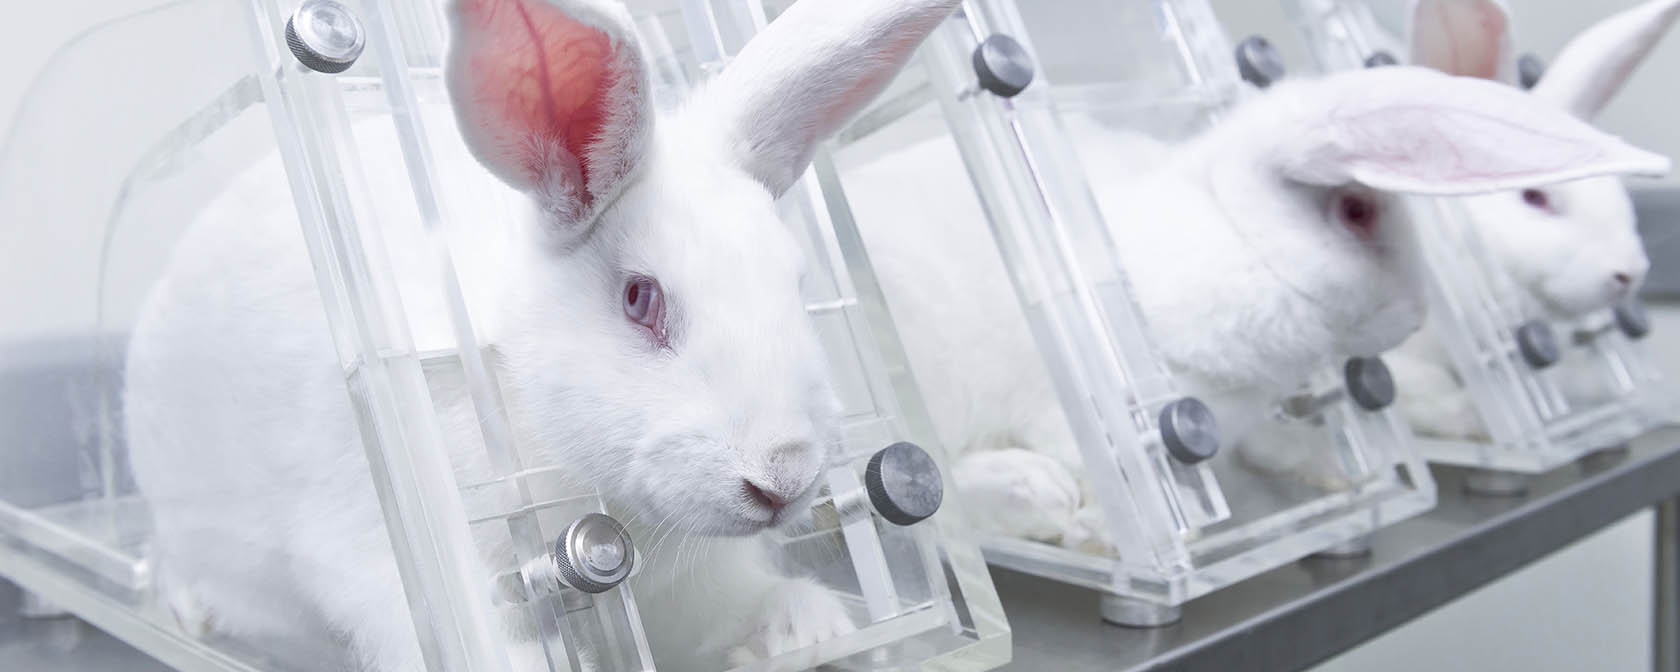 Virginia, Maryland and New Jersey among states moving rapidly to end  cosmetics testing | HSLF